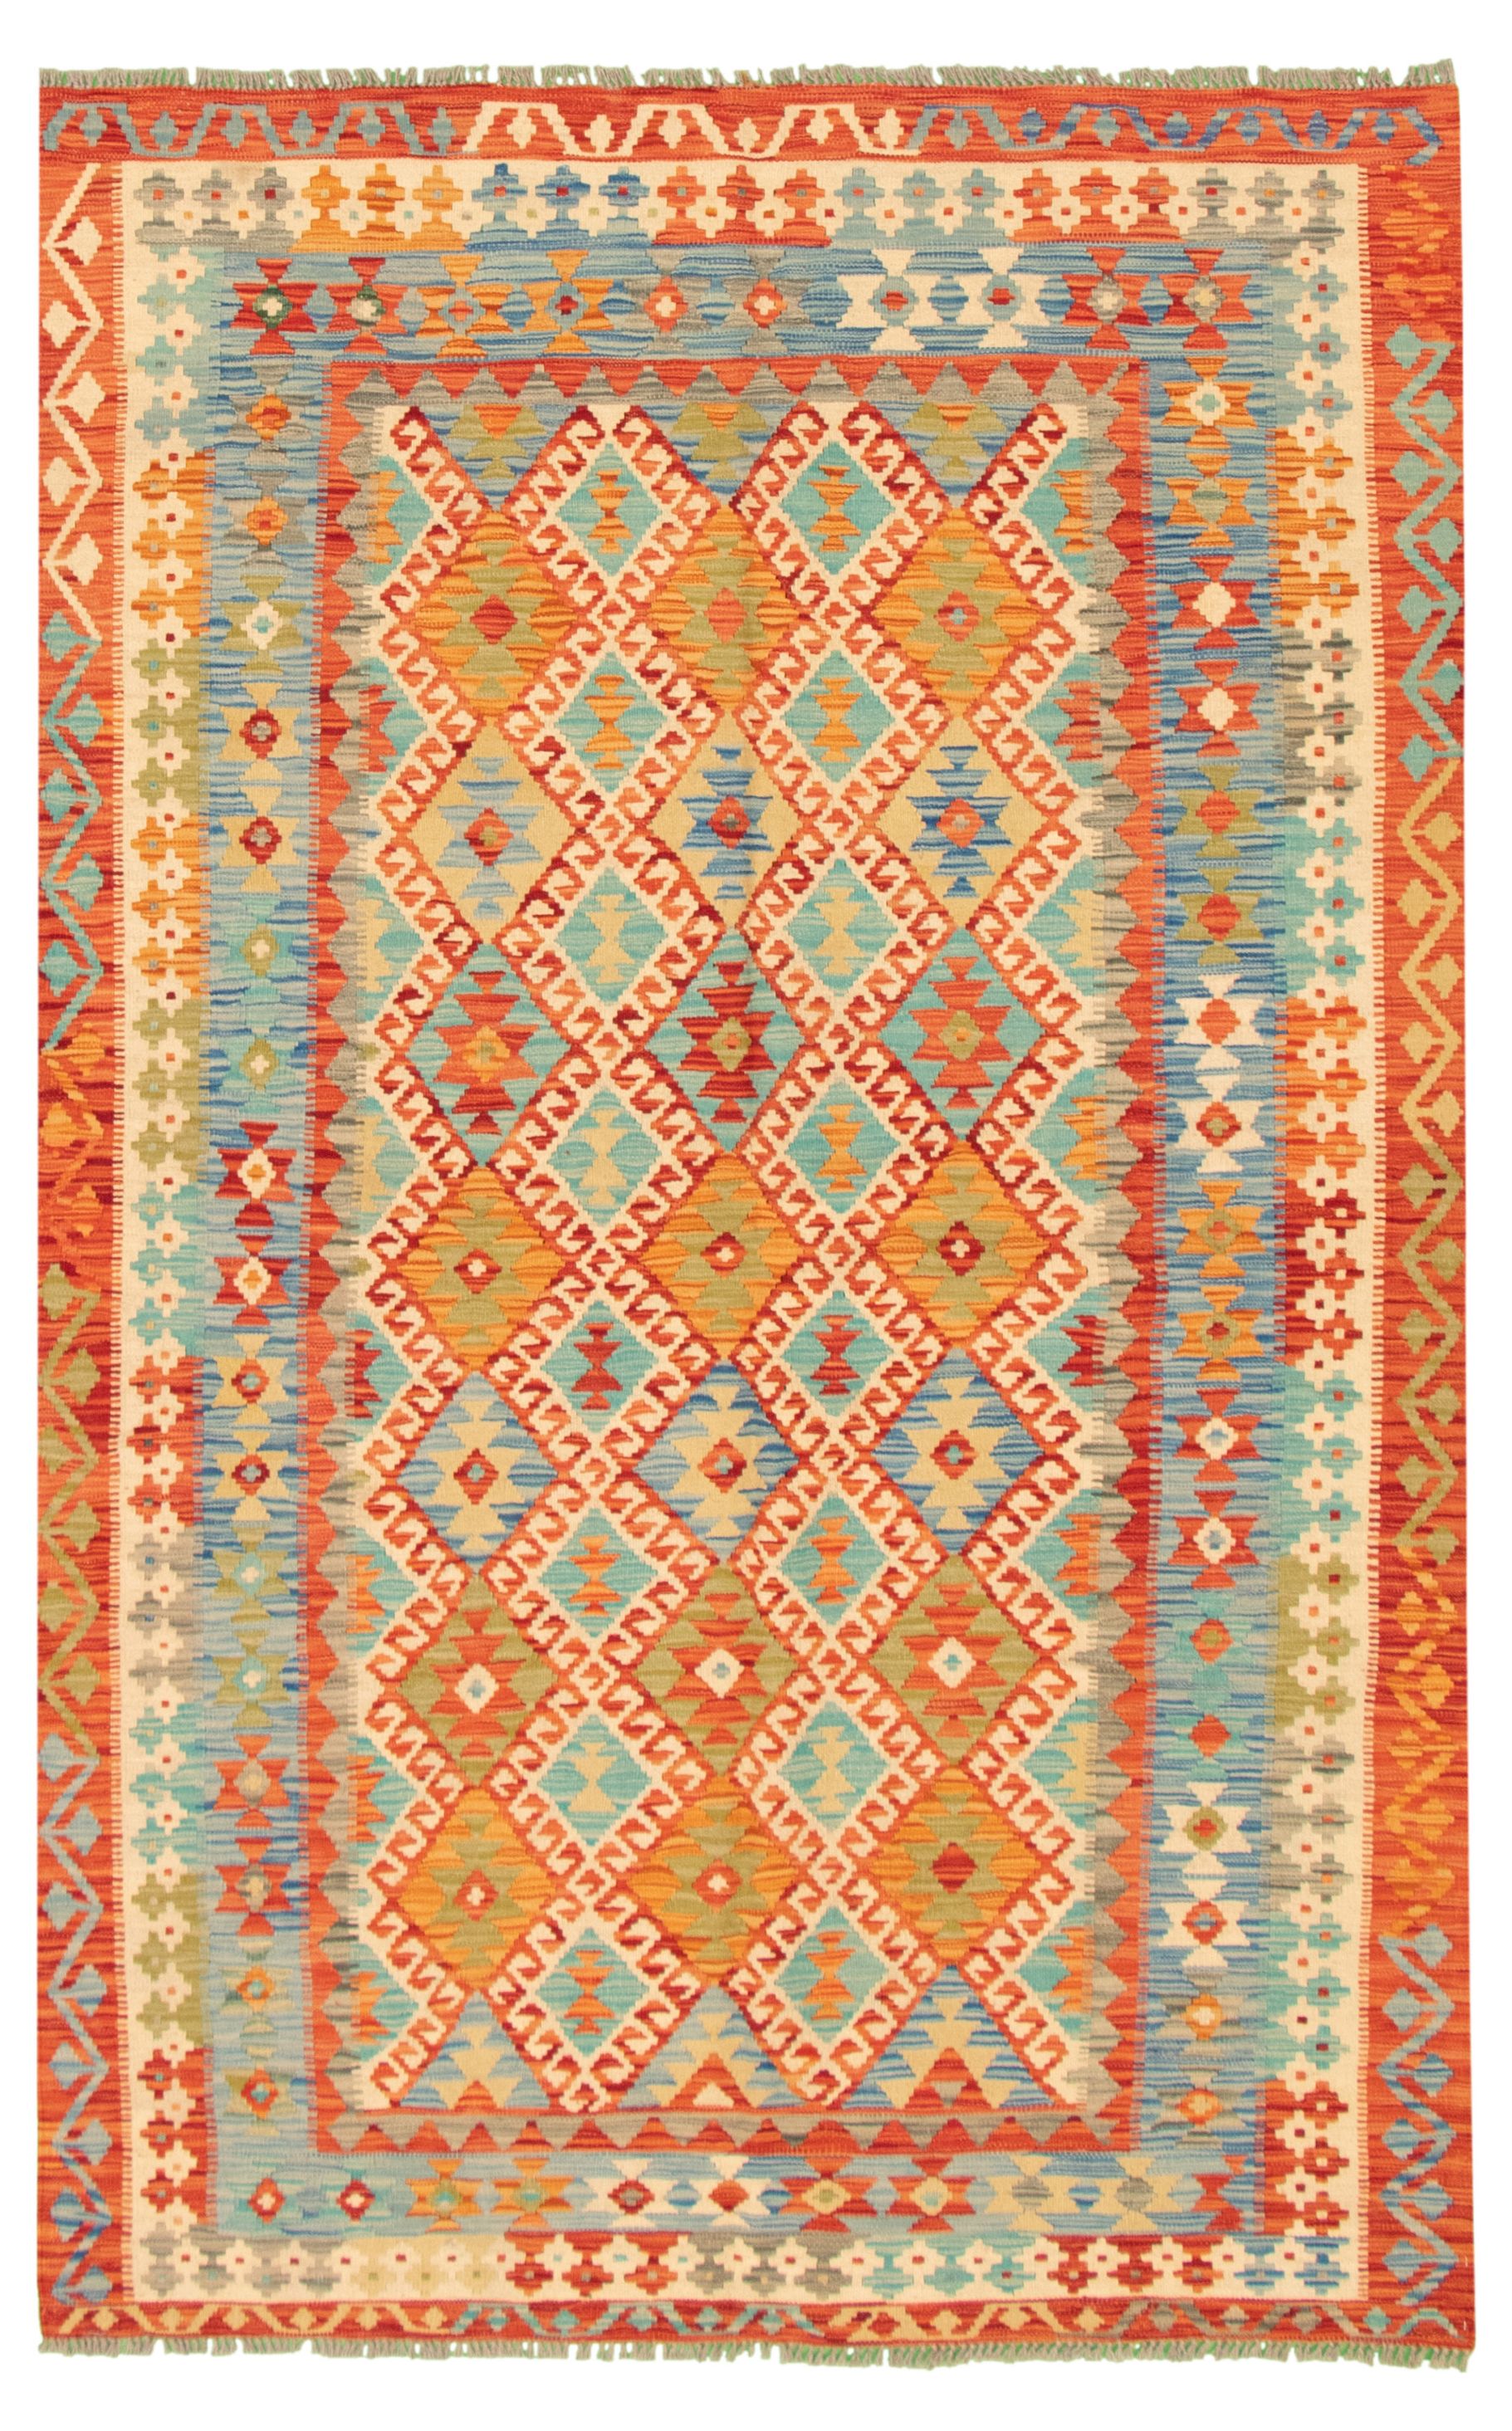 Hand woven Bold and Colorful  Ivory, Red Wool Kilim 5'6" x 8'6" Size: 5'6" x 8'6"  